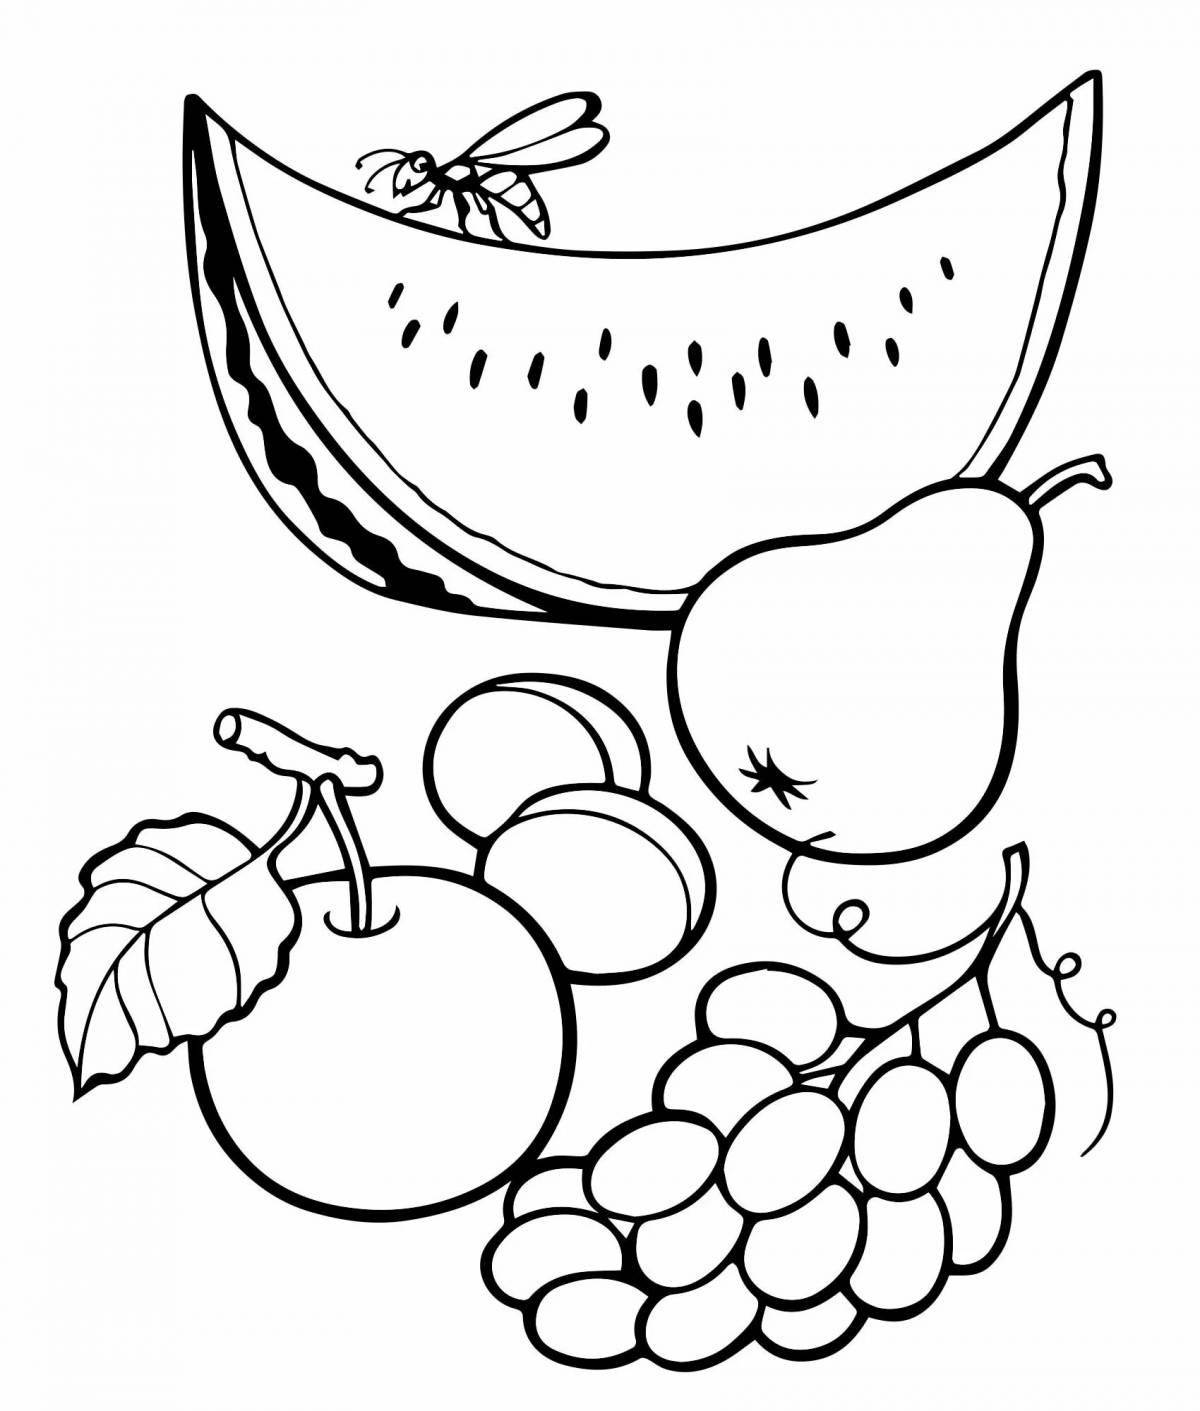 Colorful fruits coloring book for children 5-6 years old